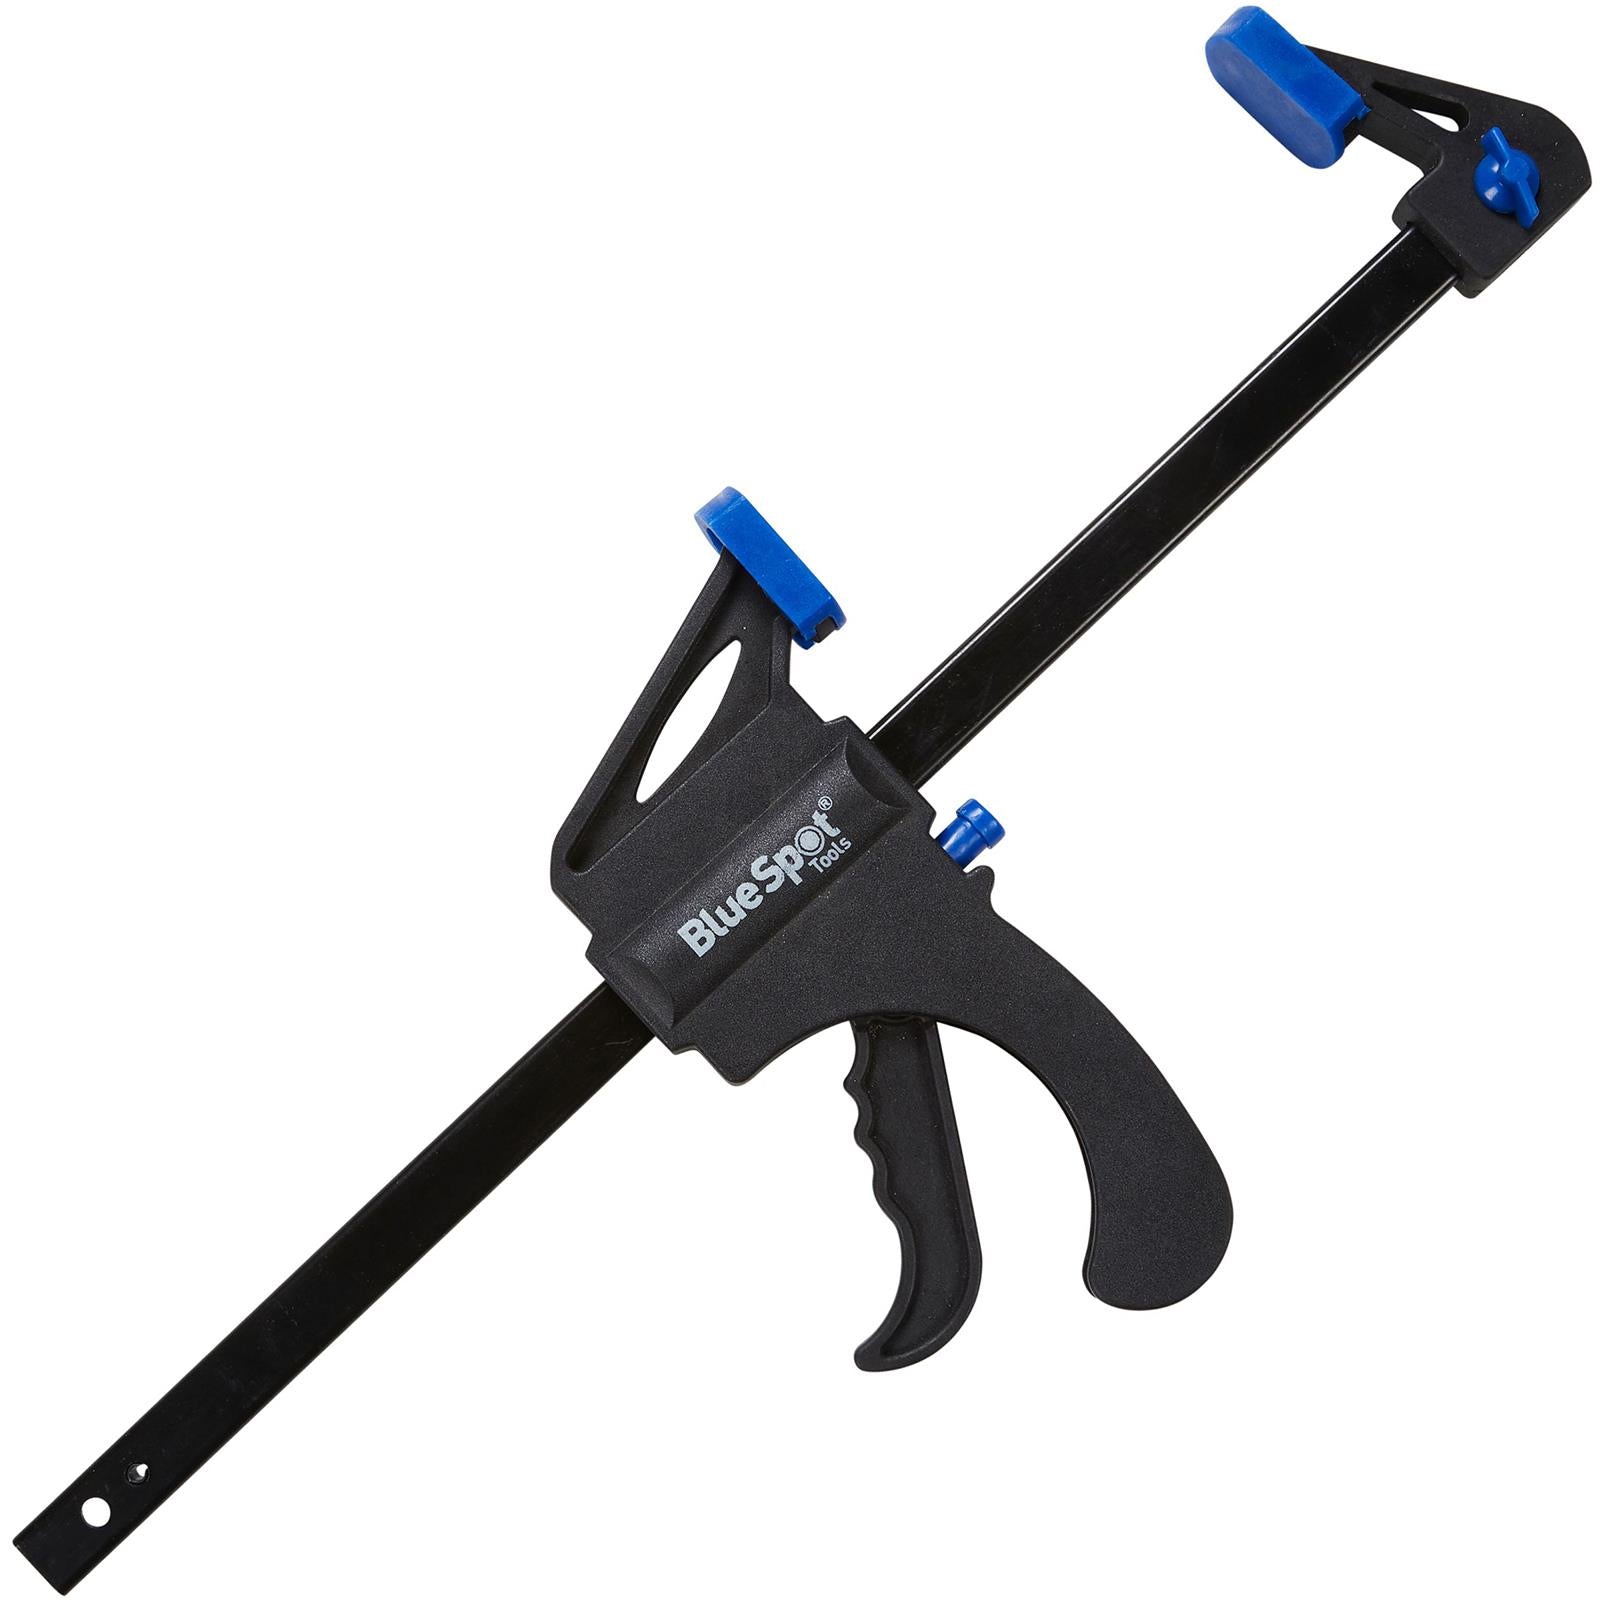 BlueSpot 12" Ratchet Speed Clamp and Spreader